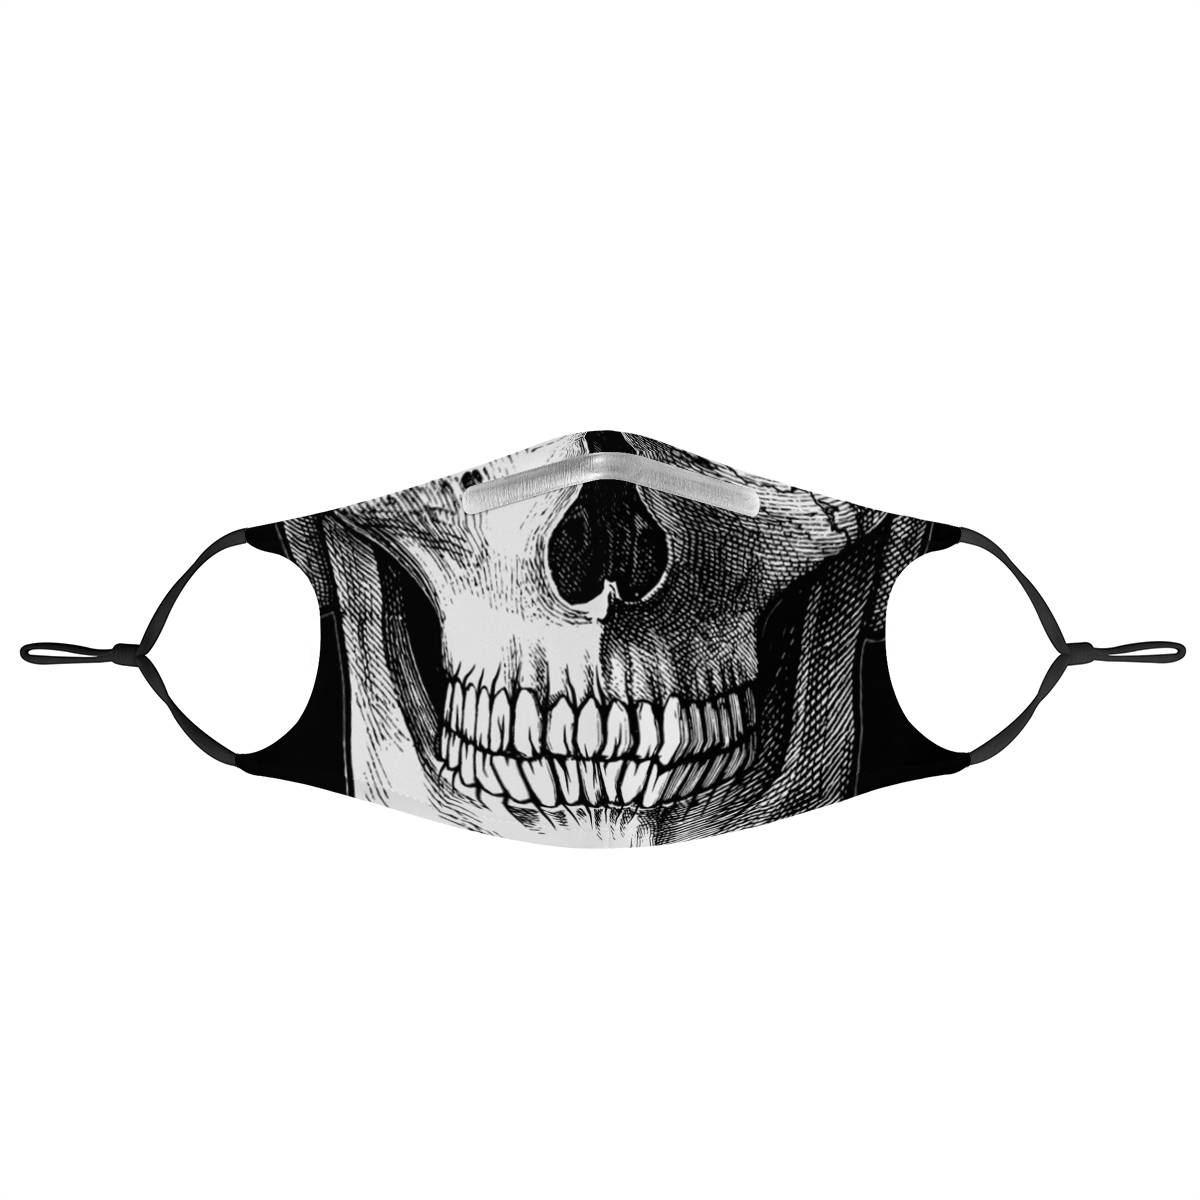 SKULL - MASK WITH (4) PM 2.5 CARBON FILTERS